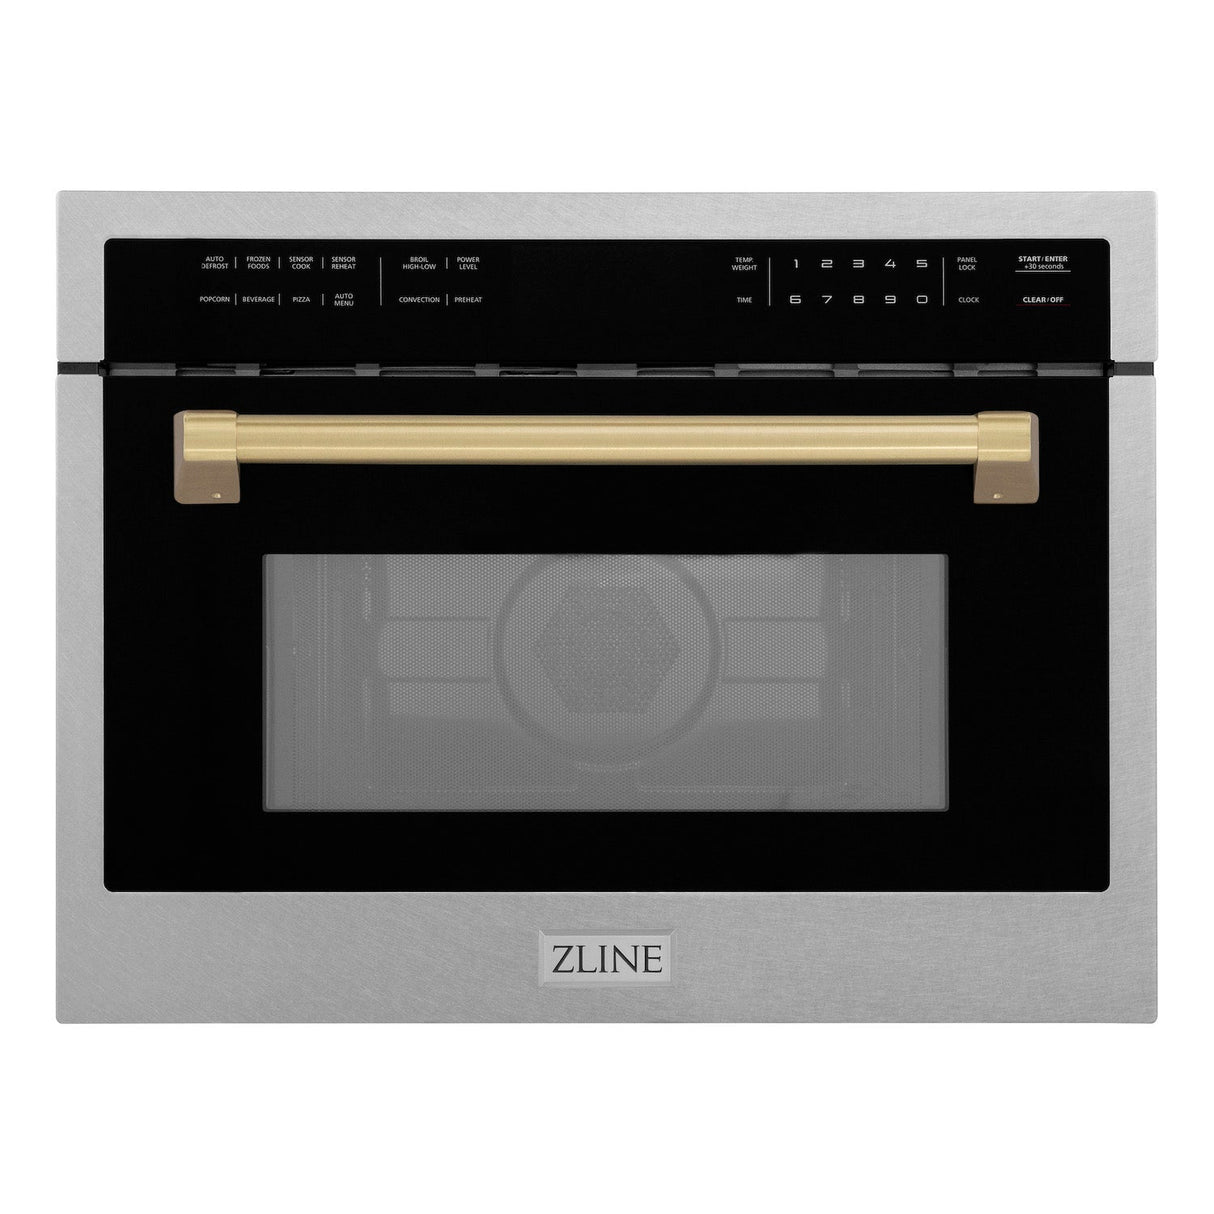 ZLINE Autograph Edition 24 in. 1.6 cu ft. Built-in Convection Microwave Oven in Fingerprint Resistant Stainless Steel with Champagne Bronze Accents (MWOZ-24-SS-CB)